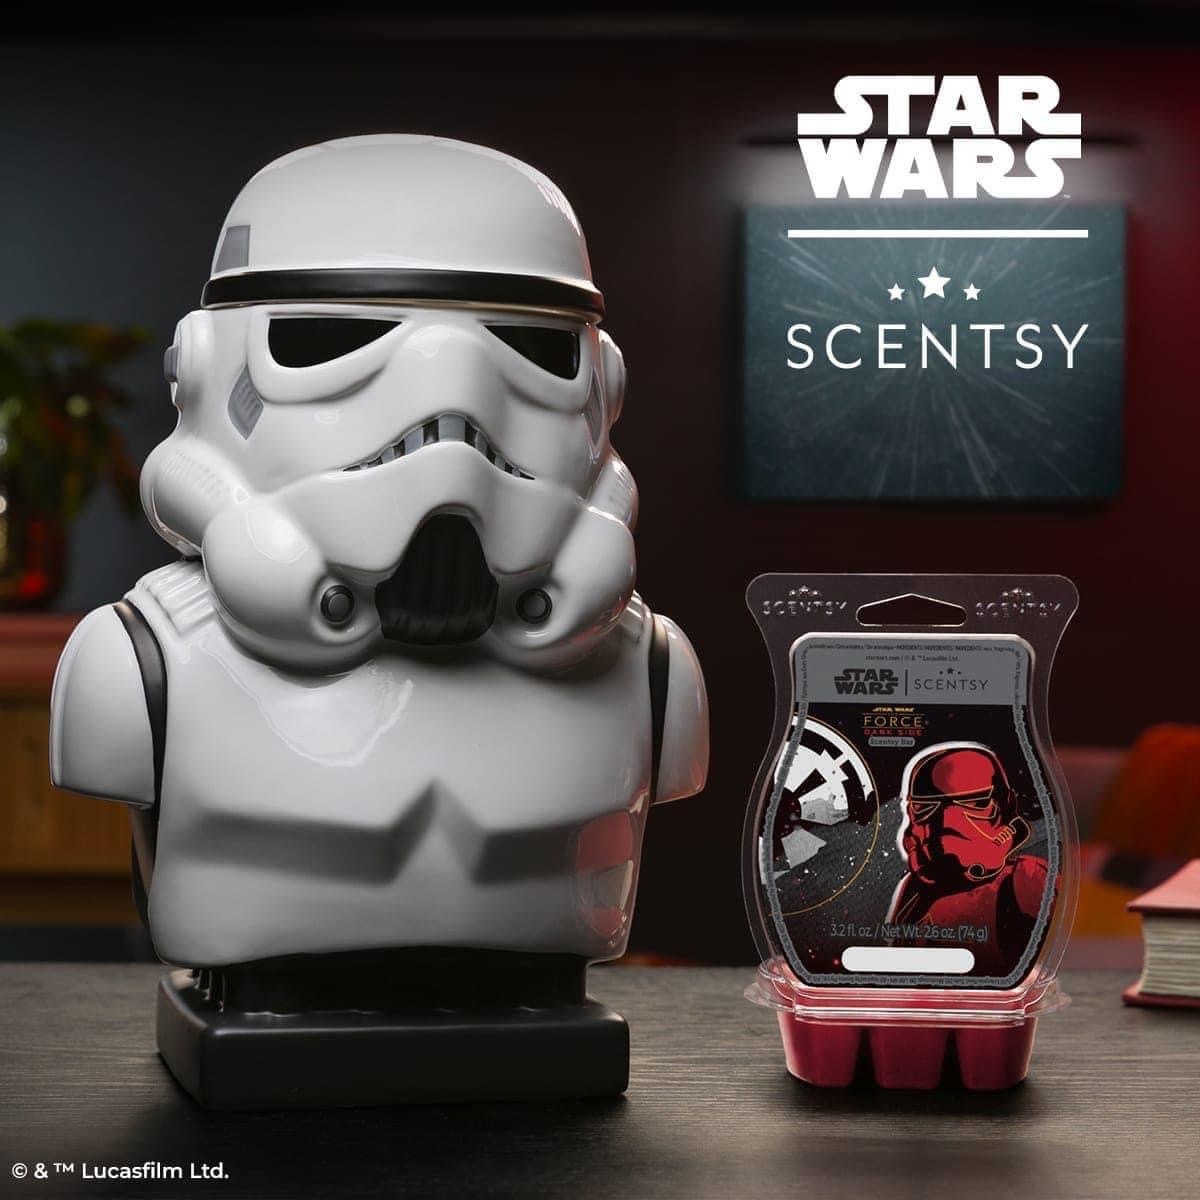 Stormtrooper™ – Scentsy Warmer

Inspired by the signature white armor & black visor of Imperial #Stormtroopers, this detailed warmer brings an air of order to any space. The wax dish even features an Imperial crest! #starwars

#ScentsyWithCatharine #ScentsyIndependentConsultant